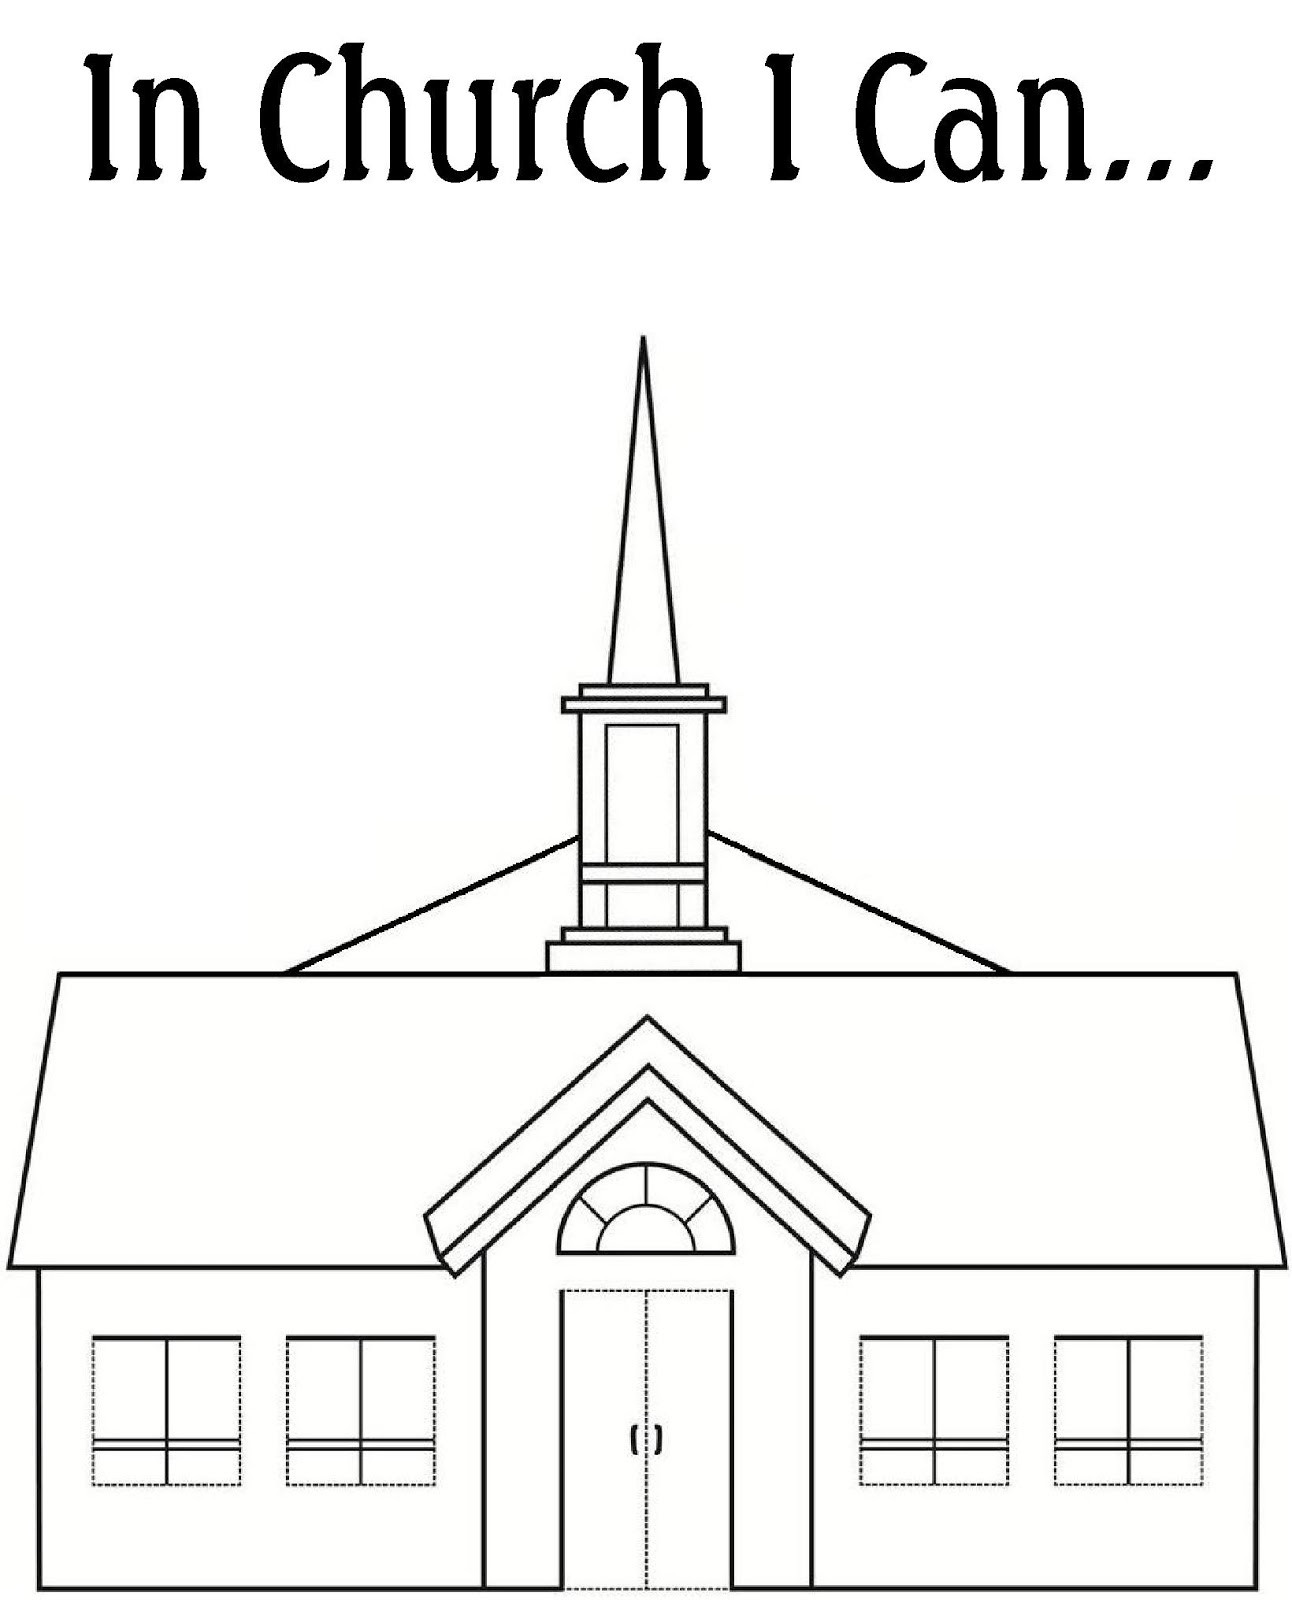 Kids Coloring Pages For Church
 RobbyGurl s Creations My Church Coloring Book